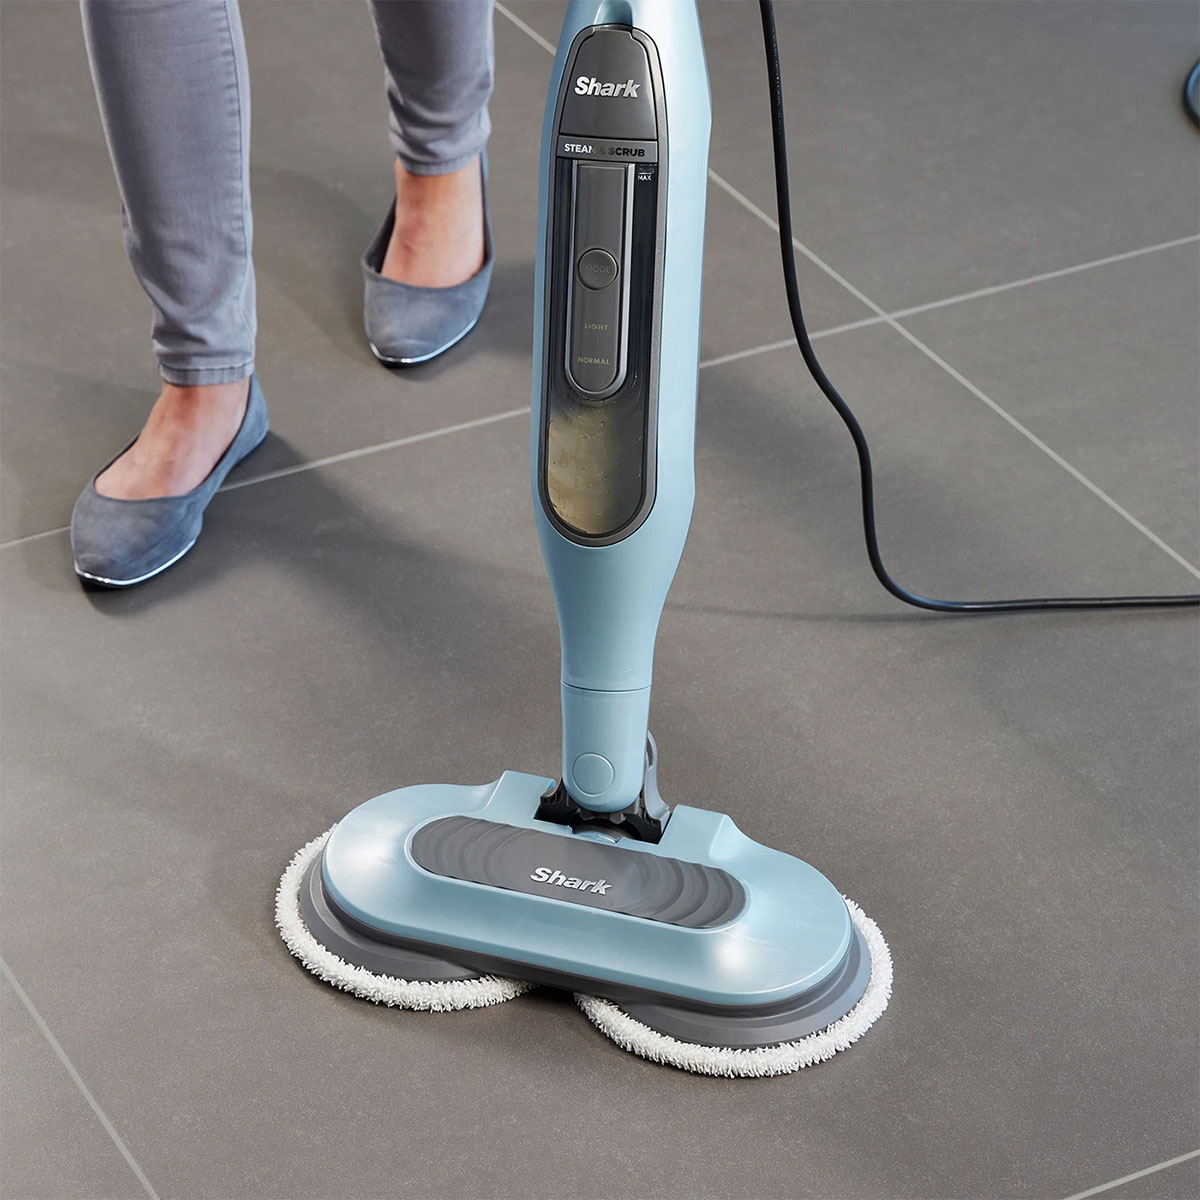 How To Use A Shark Steam Cleaner